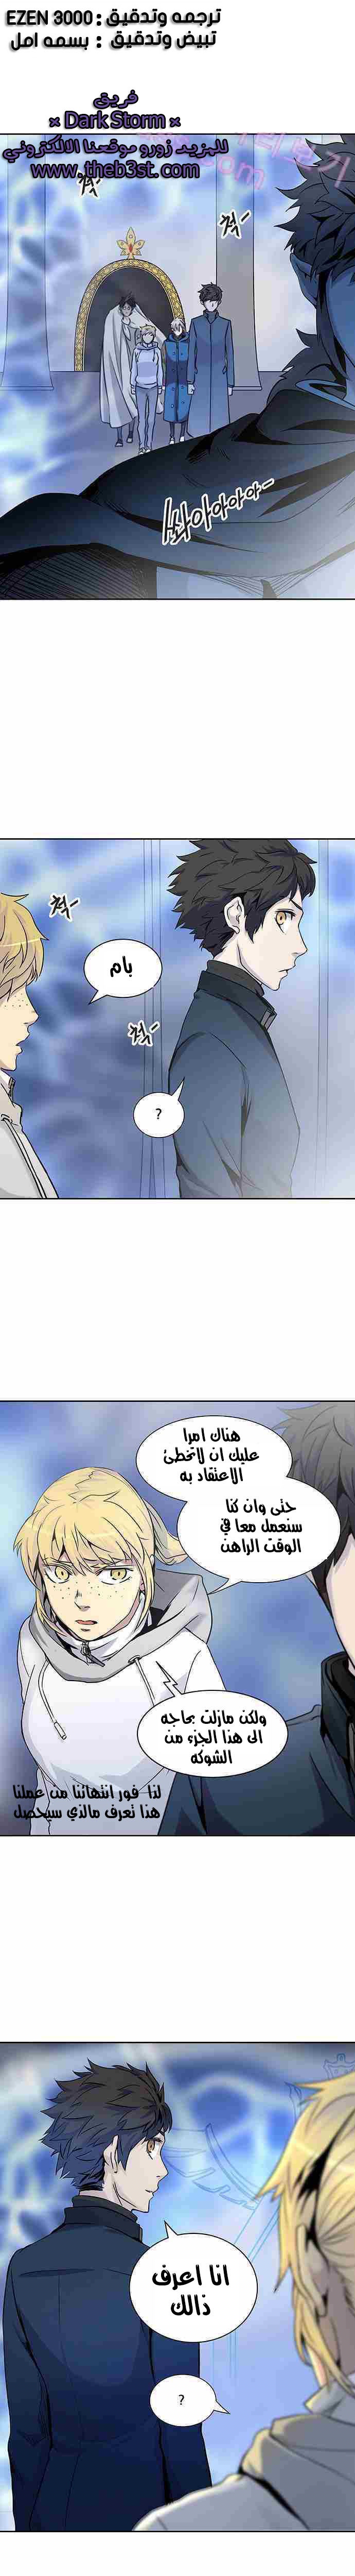 Tower of God 2: Chapter 247 - Page 1